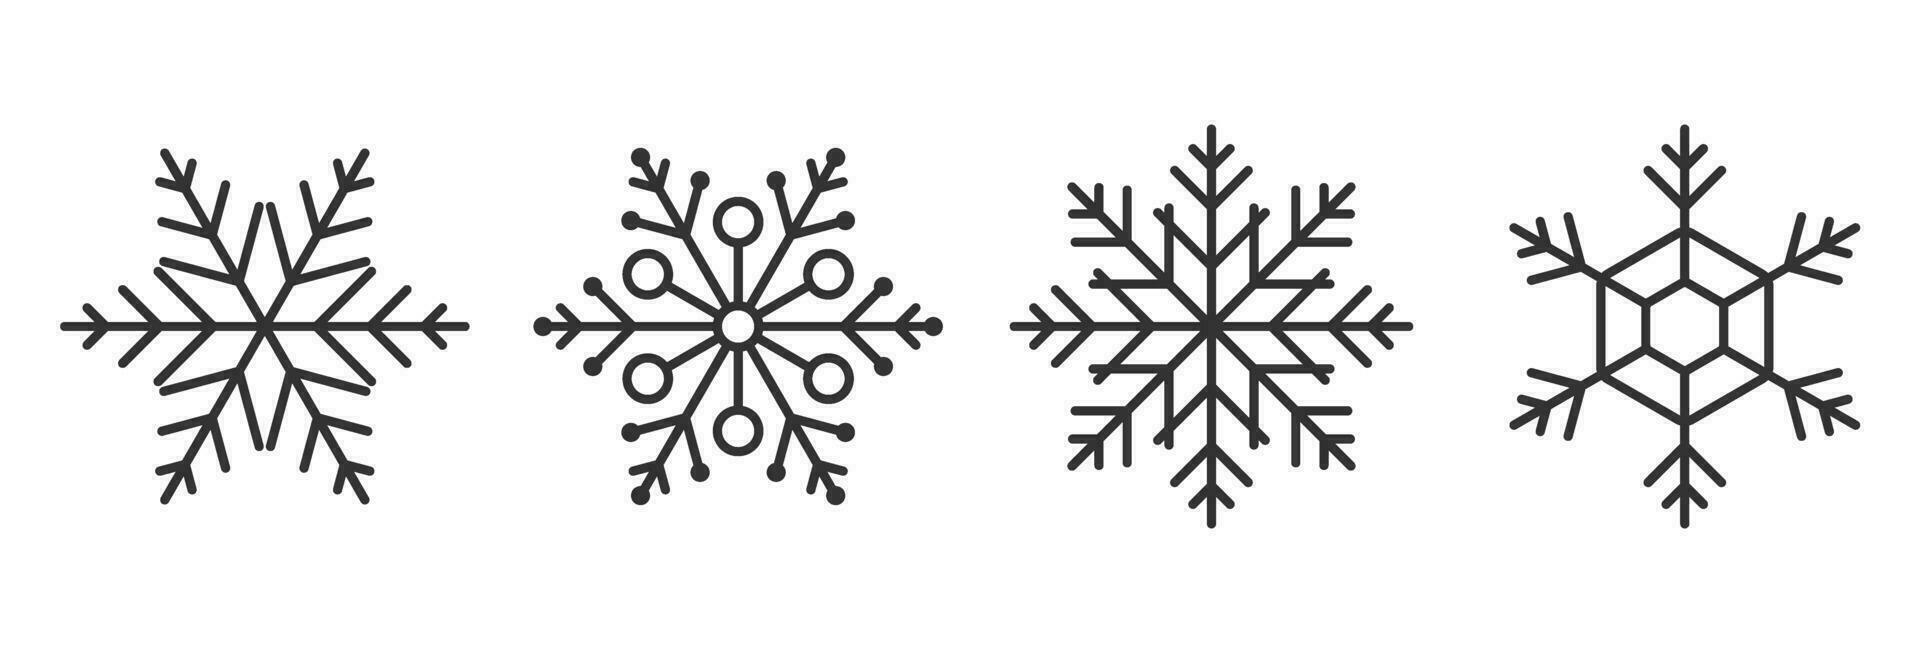 snow icon for christmas and new year in winter vector